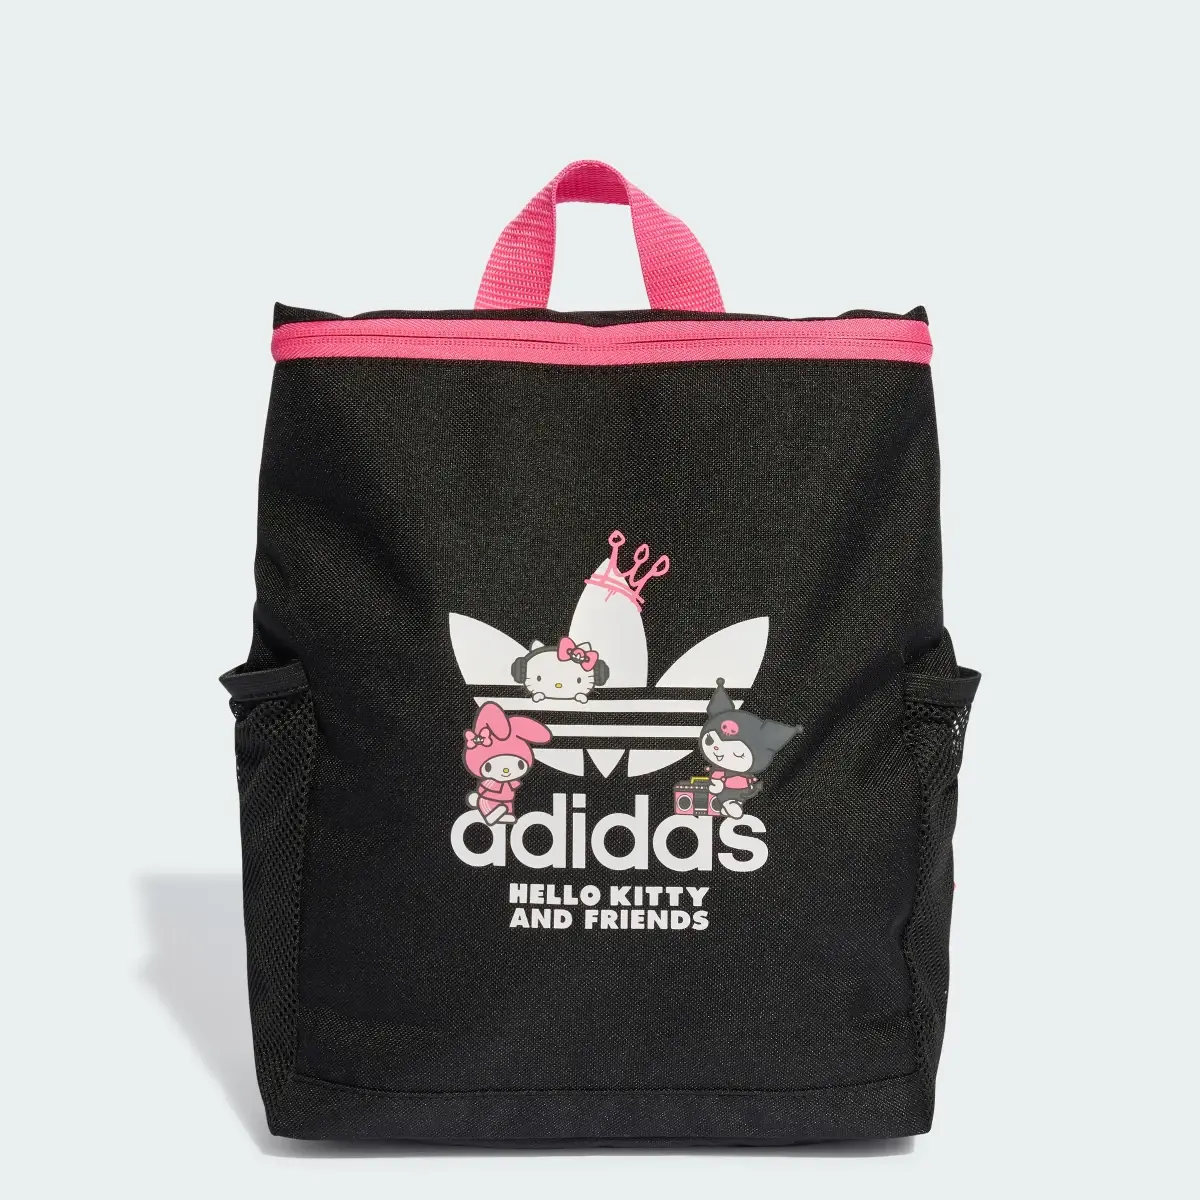 Adidas Originals x Hello Kitty and Friends Backpack Kids. 1